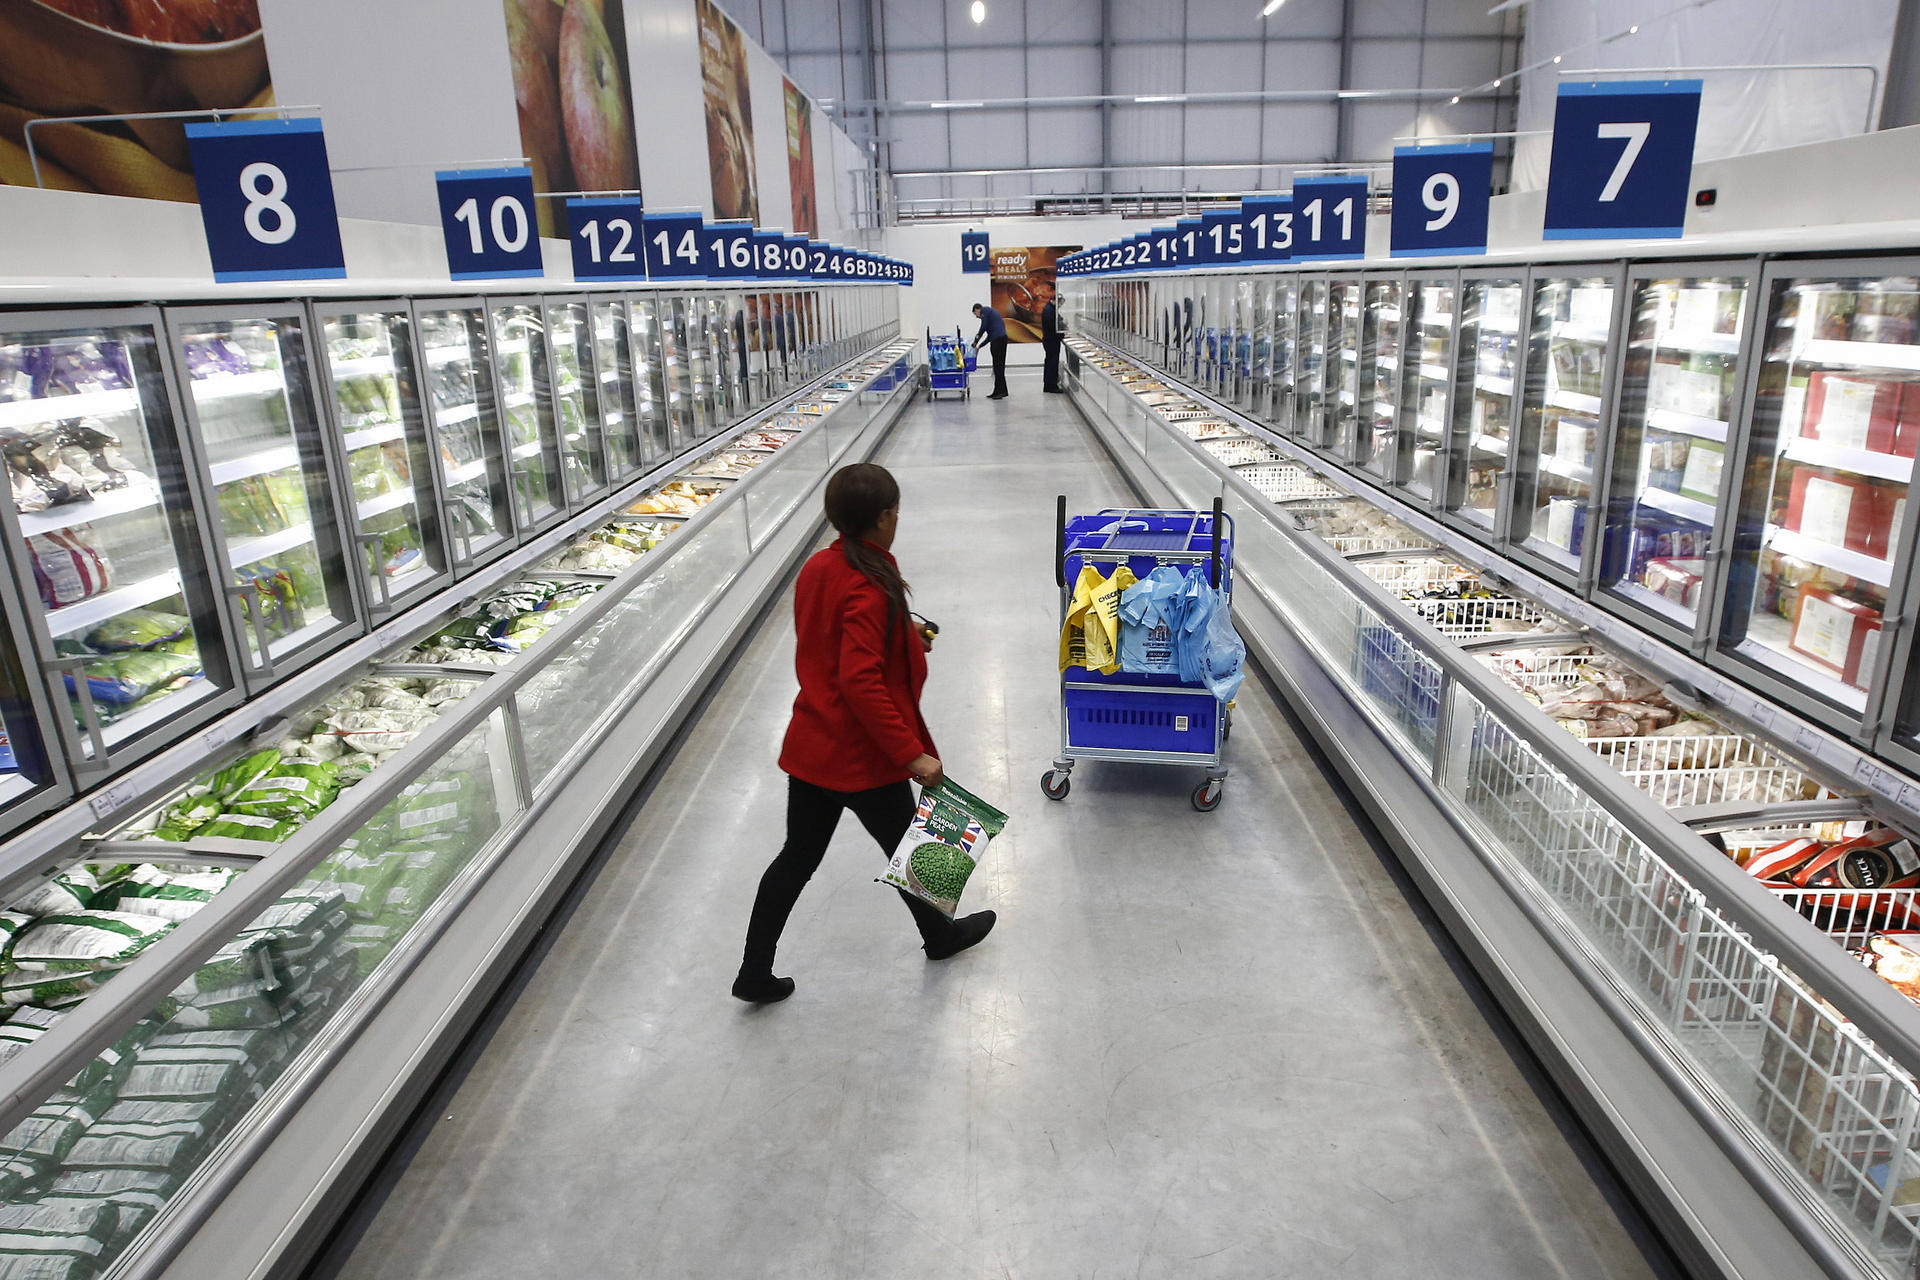 The adoption of big data has helped Tesco achieve the No 1 position among online retailers in South Korea. Photo: Bloomberg